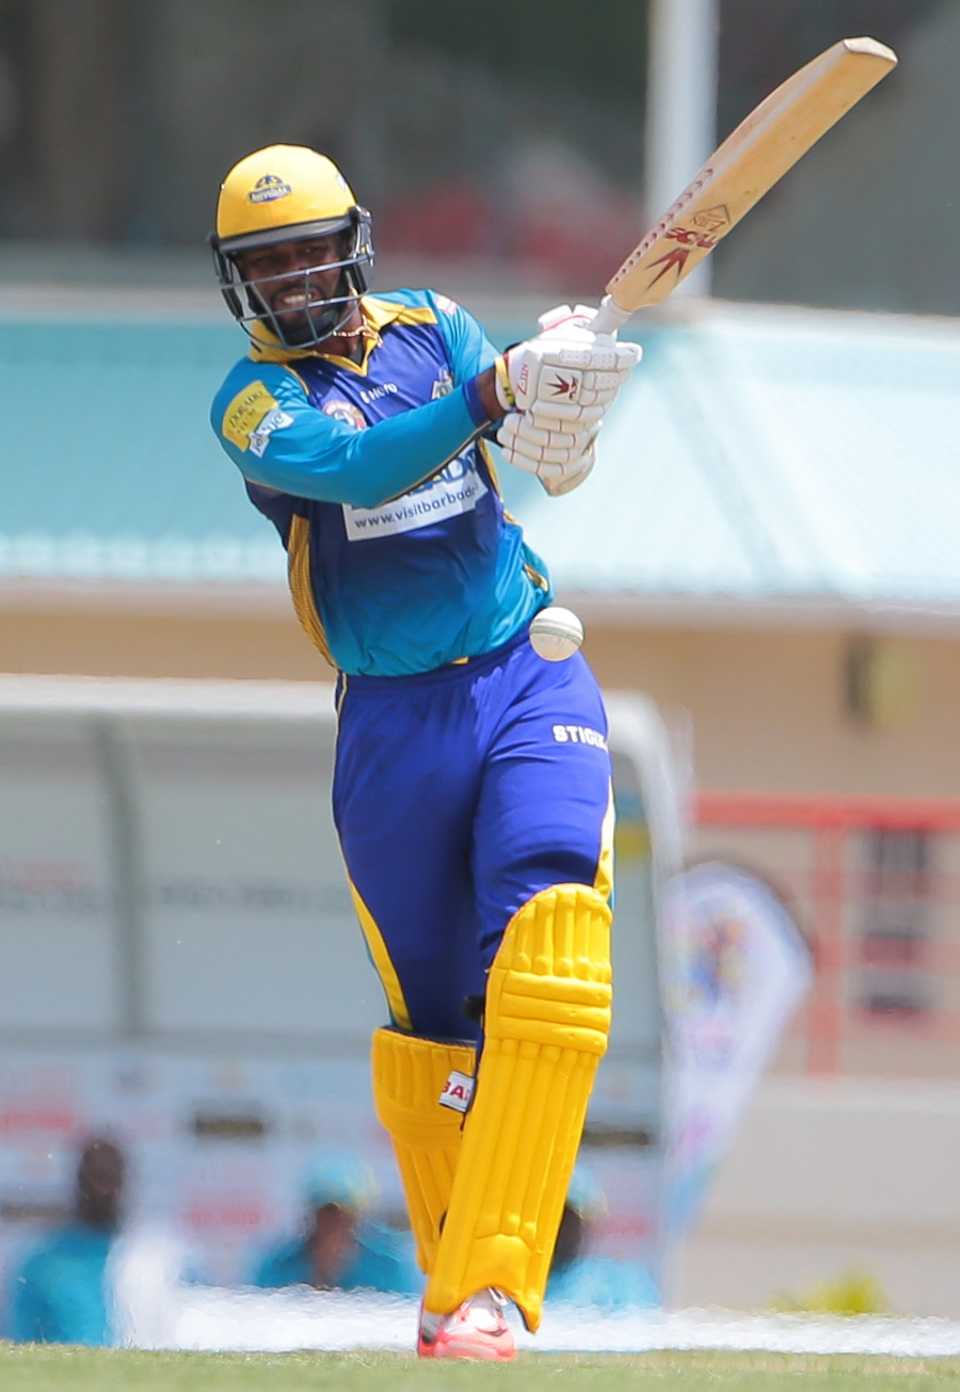 Kyle Hope hit his maiden T20 fifty